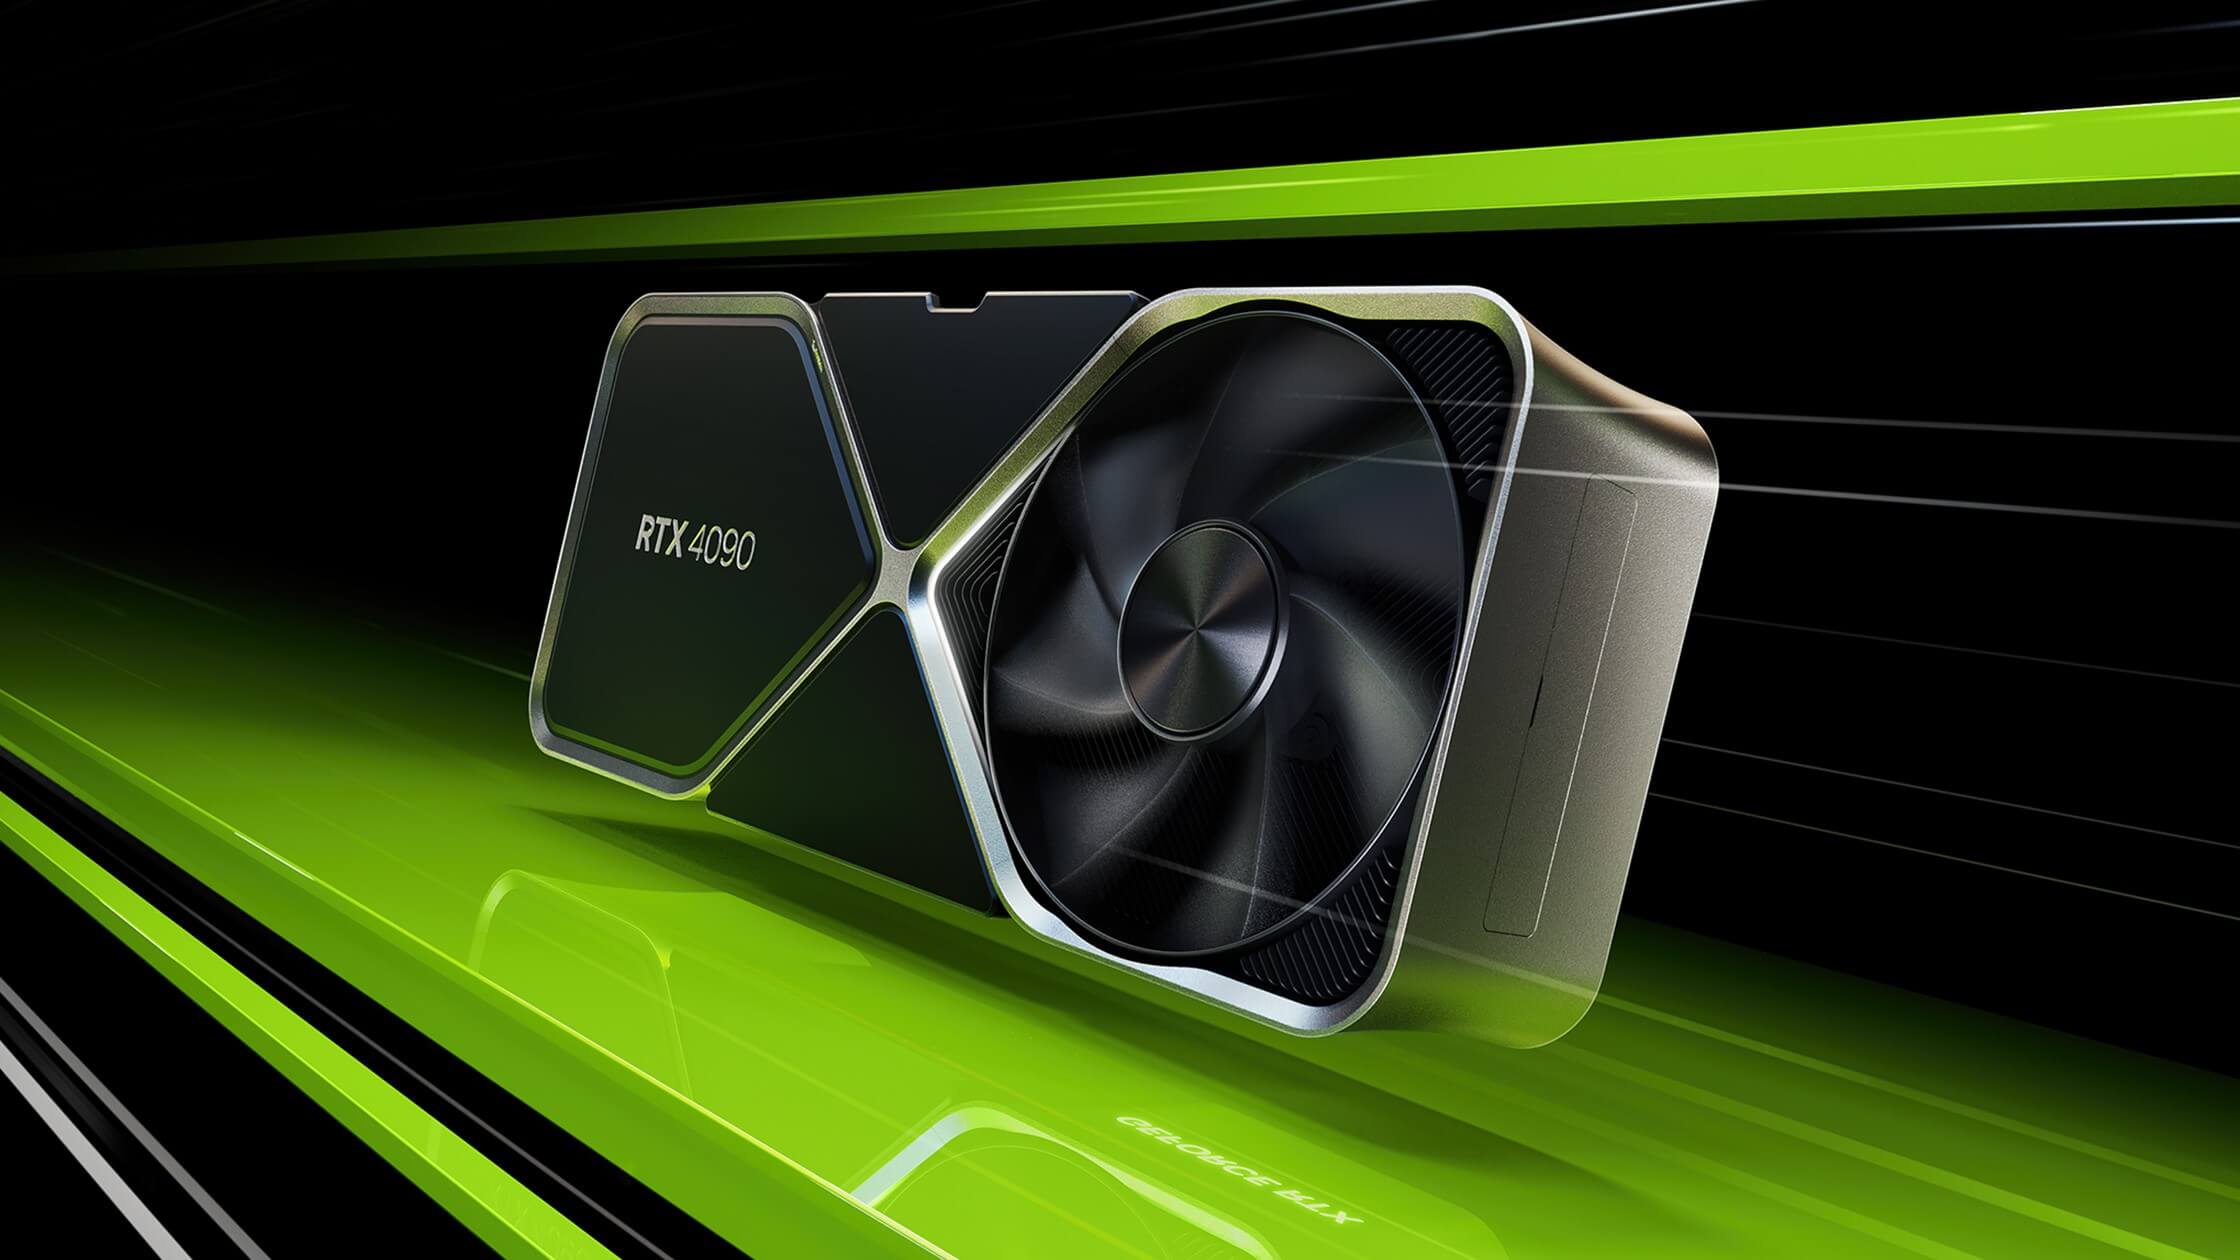 Gamers can benefit from Intel’s competition with NVIDIA in the GPU market